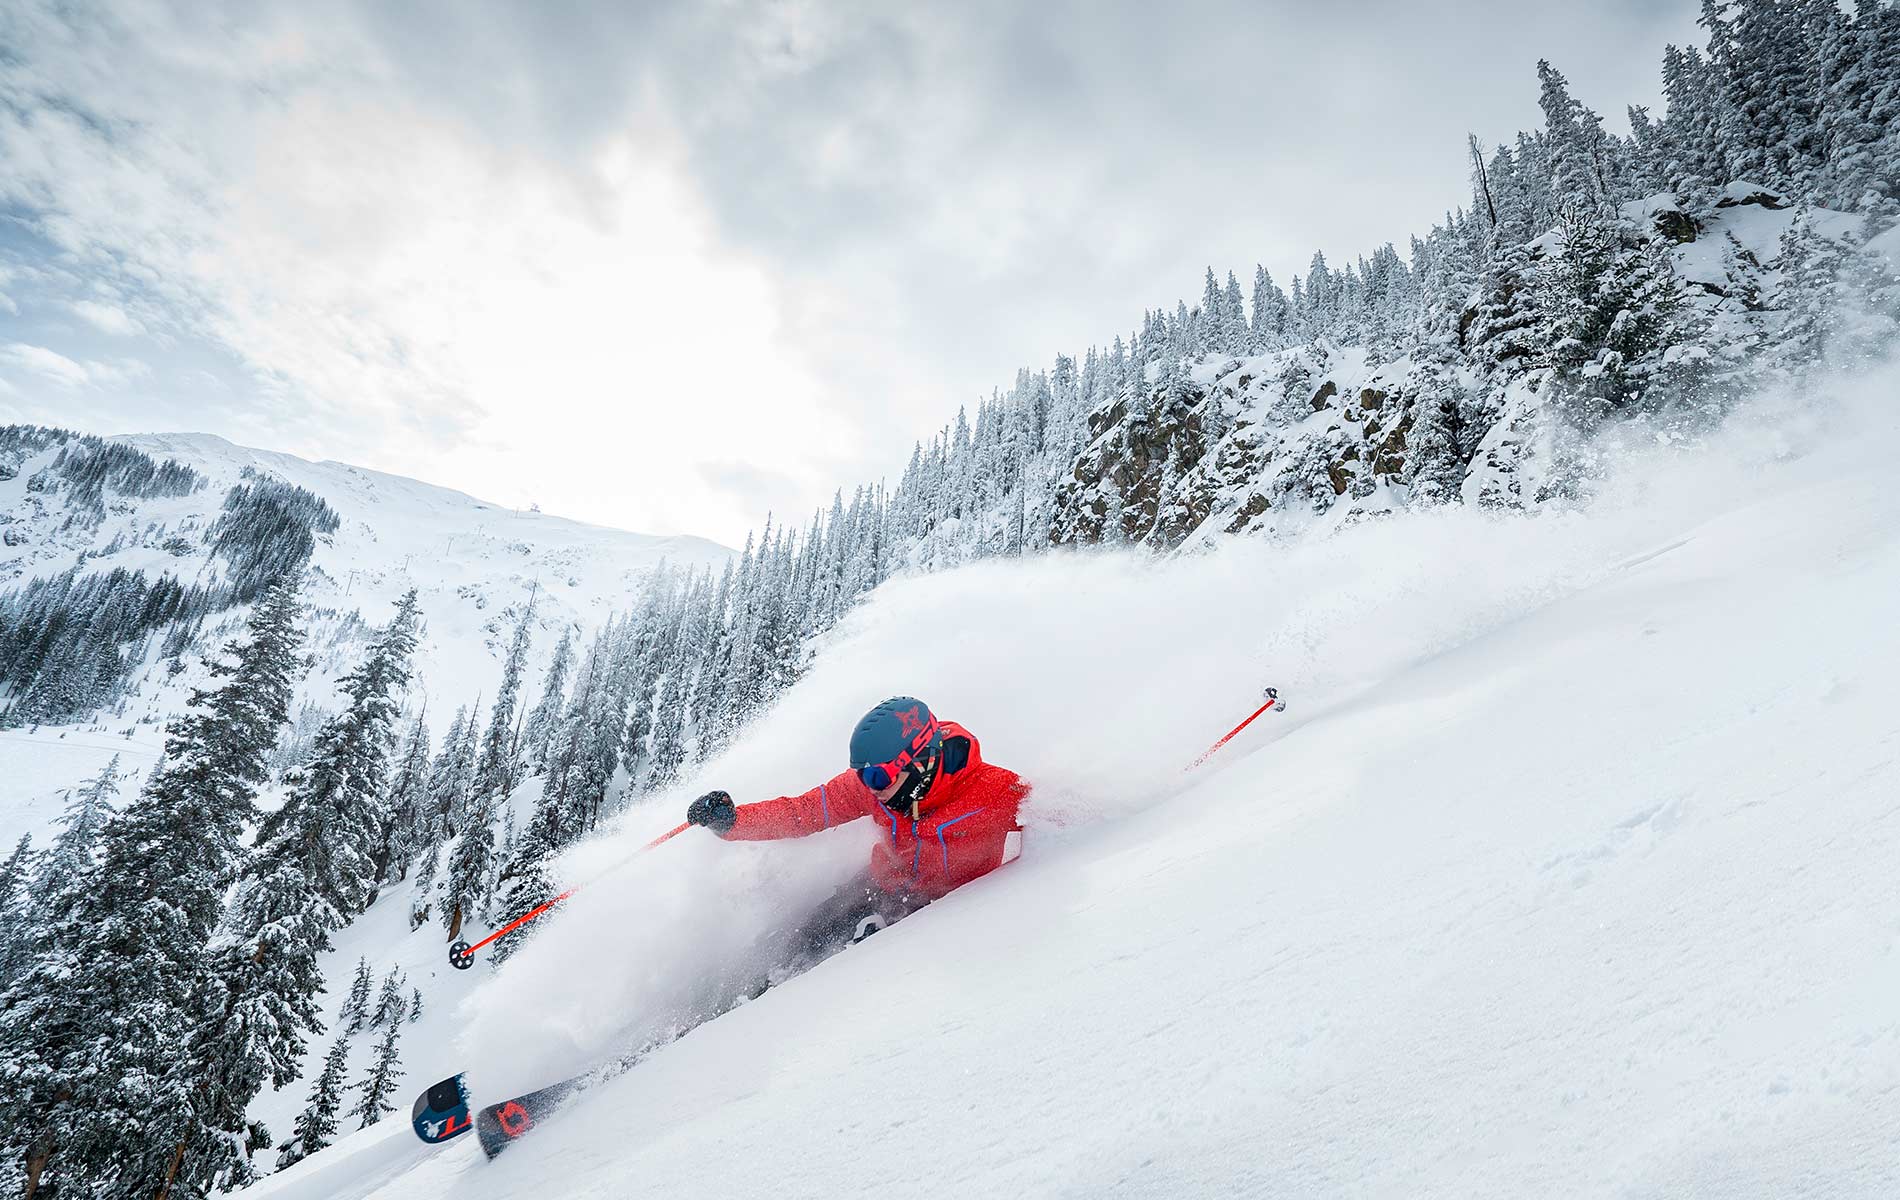 Taos Ski Valley is the perfect place for adventure lovers or those looking for a relaxing day at the spa after time spent on the slopes—you might even make some new friends!